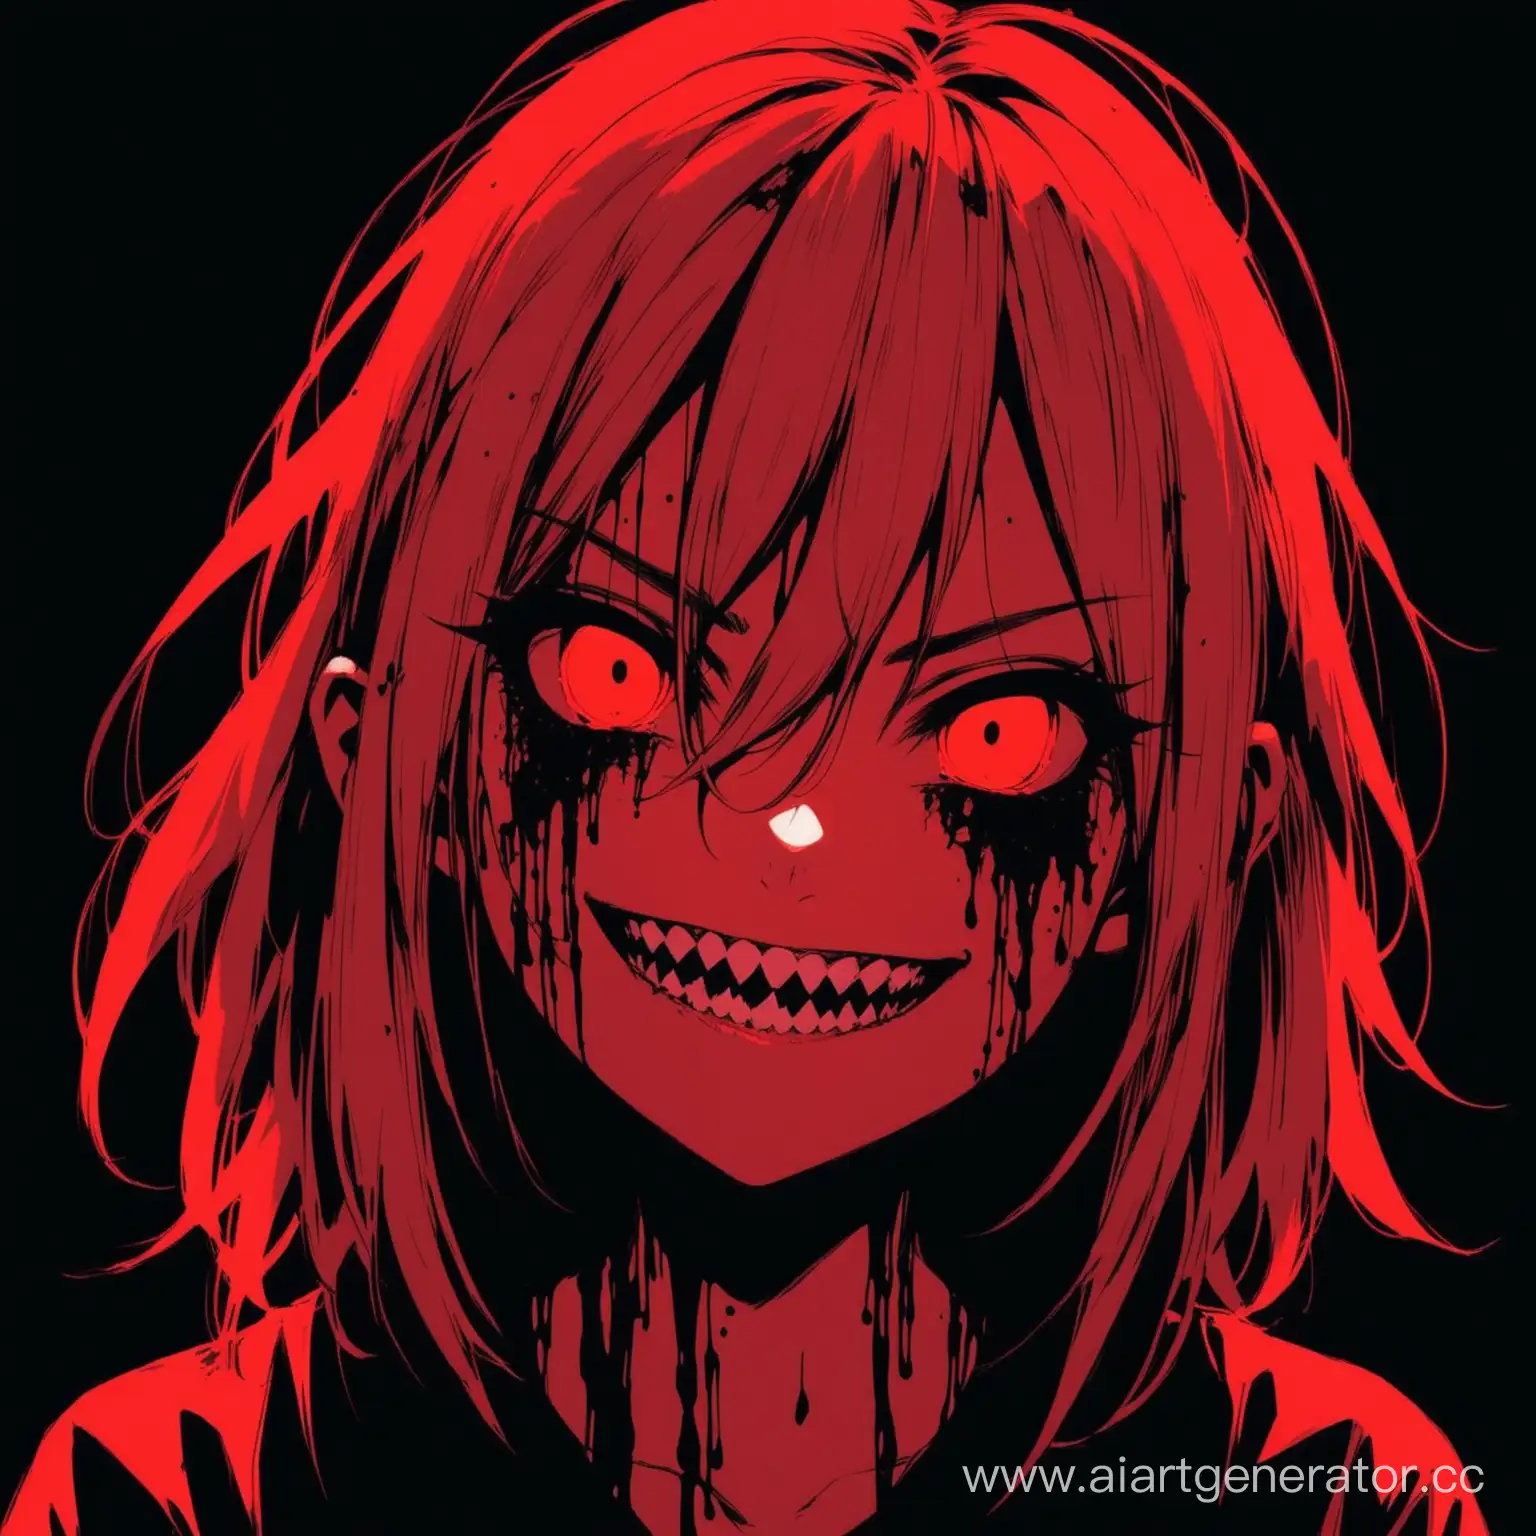 Sinister-Grinning-Girl-with-Sharp-Teeth-in-Red-Black-Filter-and-Blood